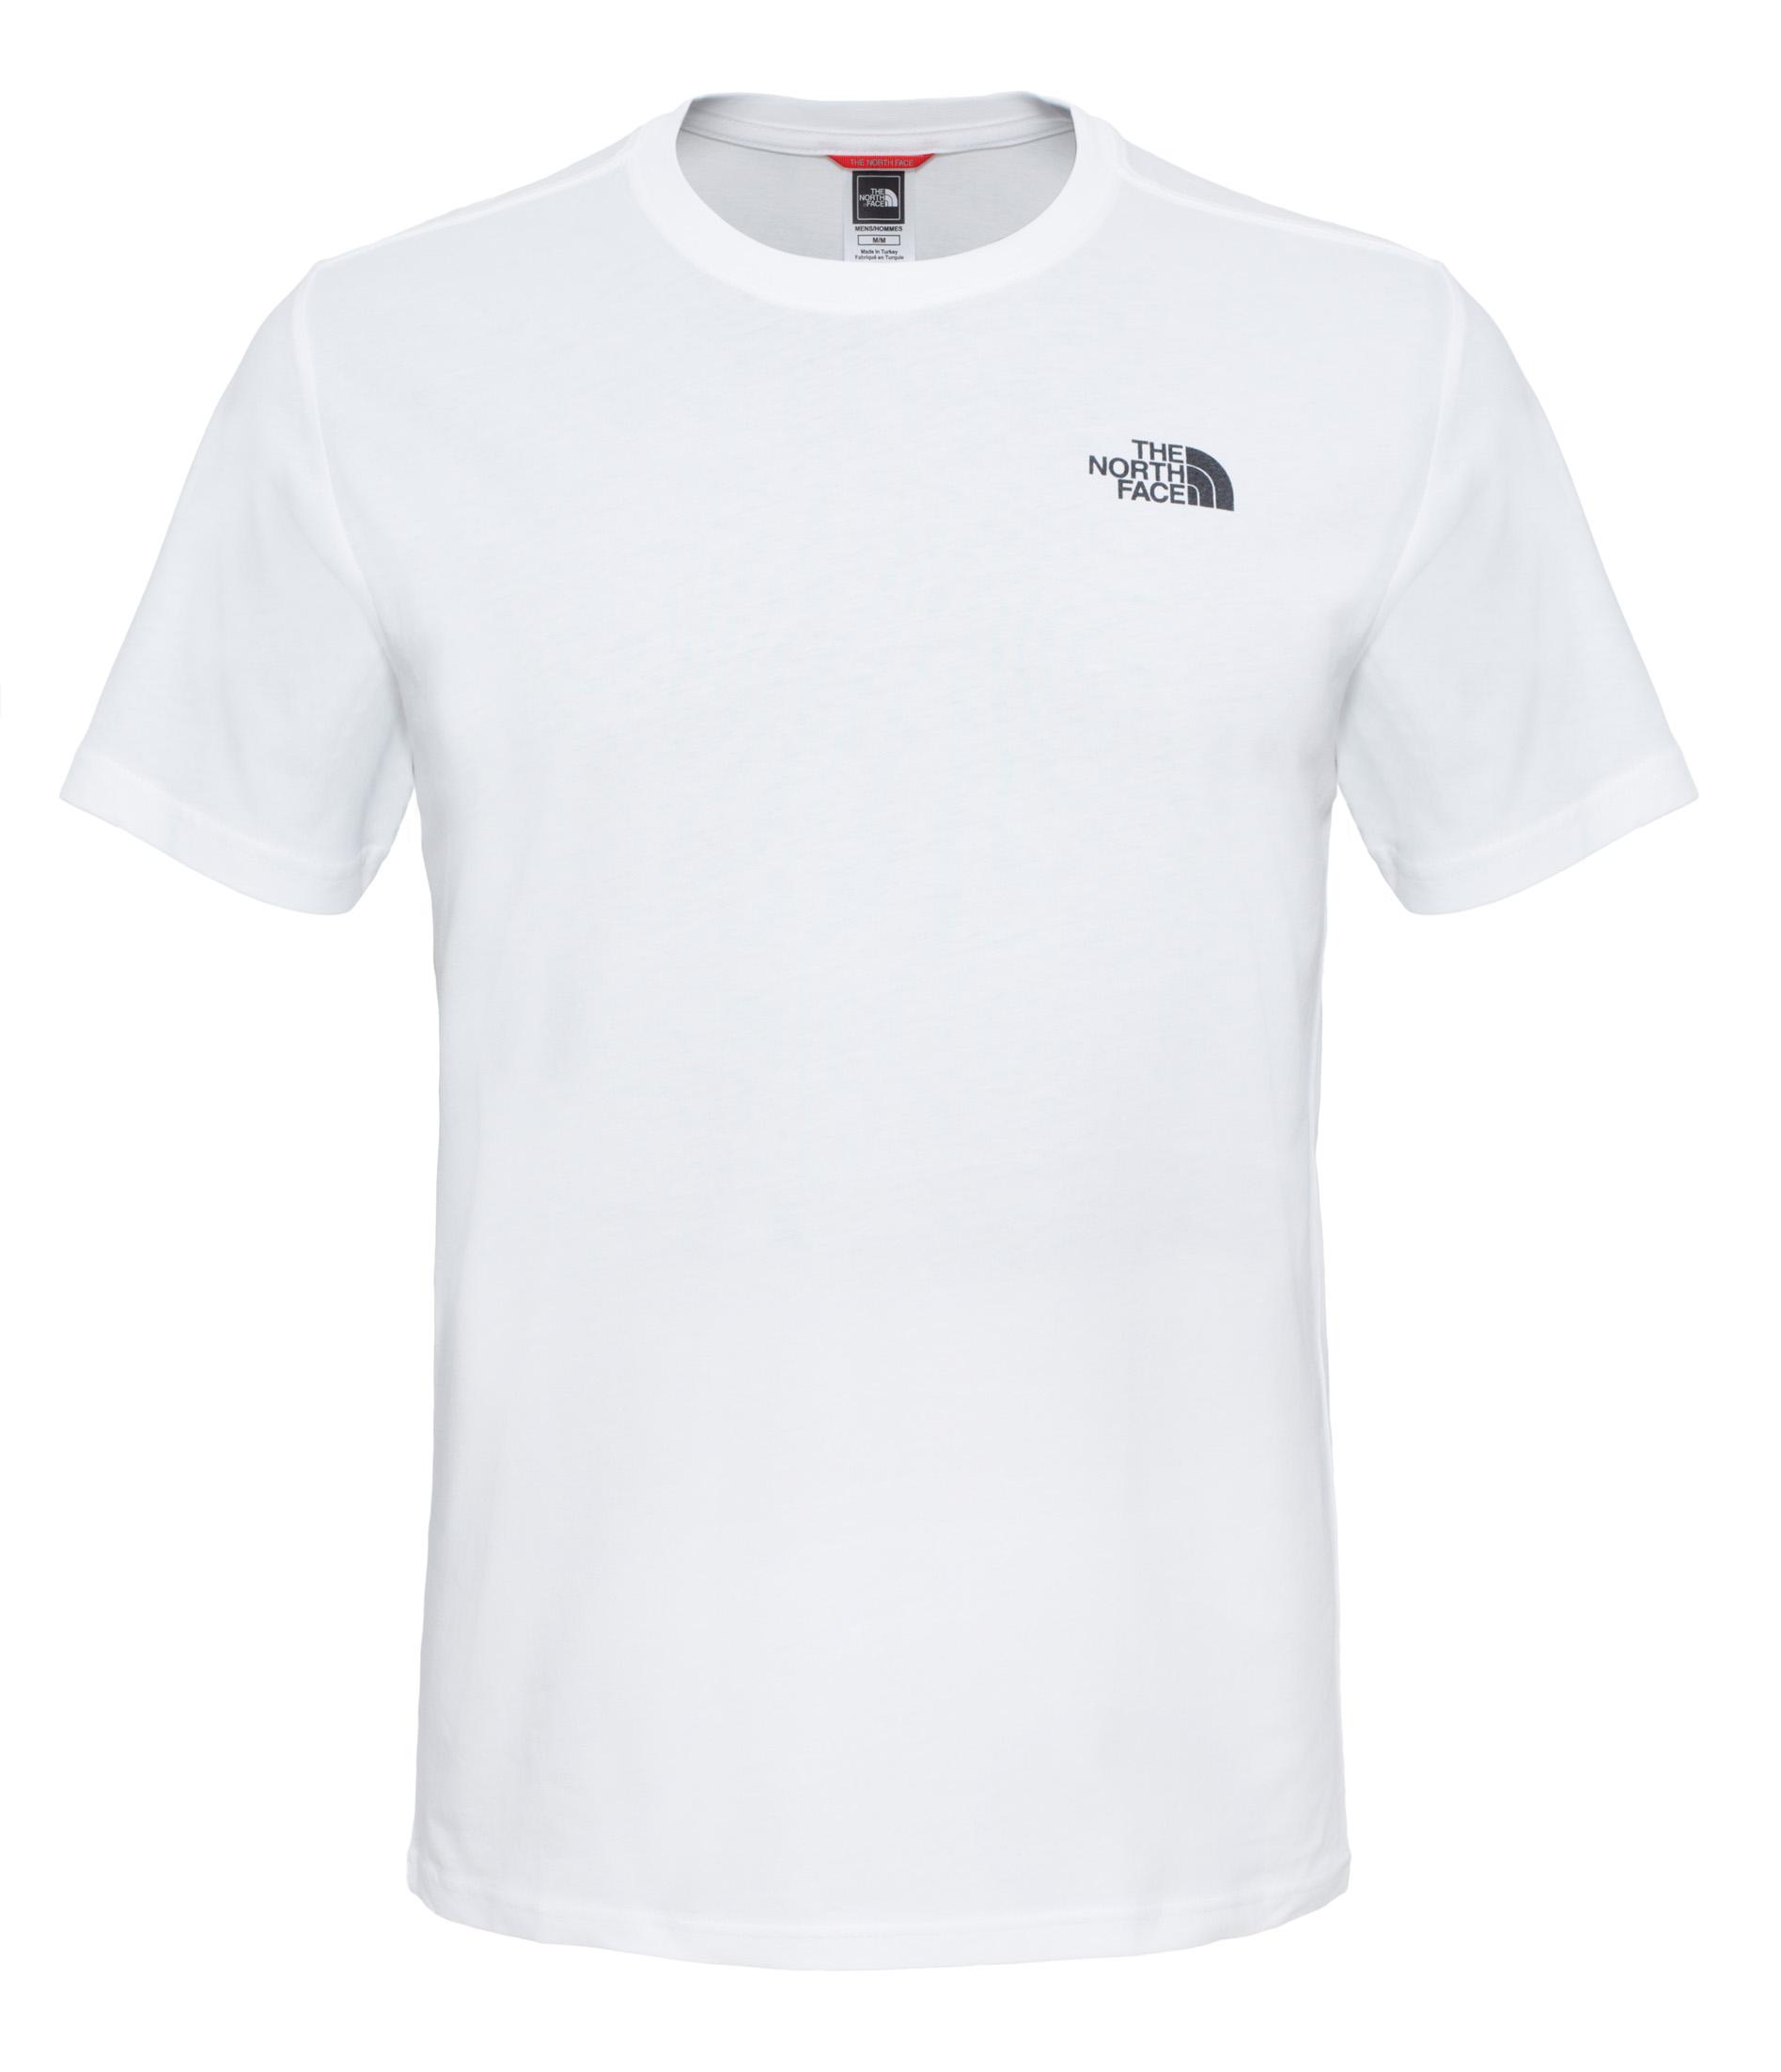 The North Face Red Box Tee - Tnf White